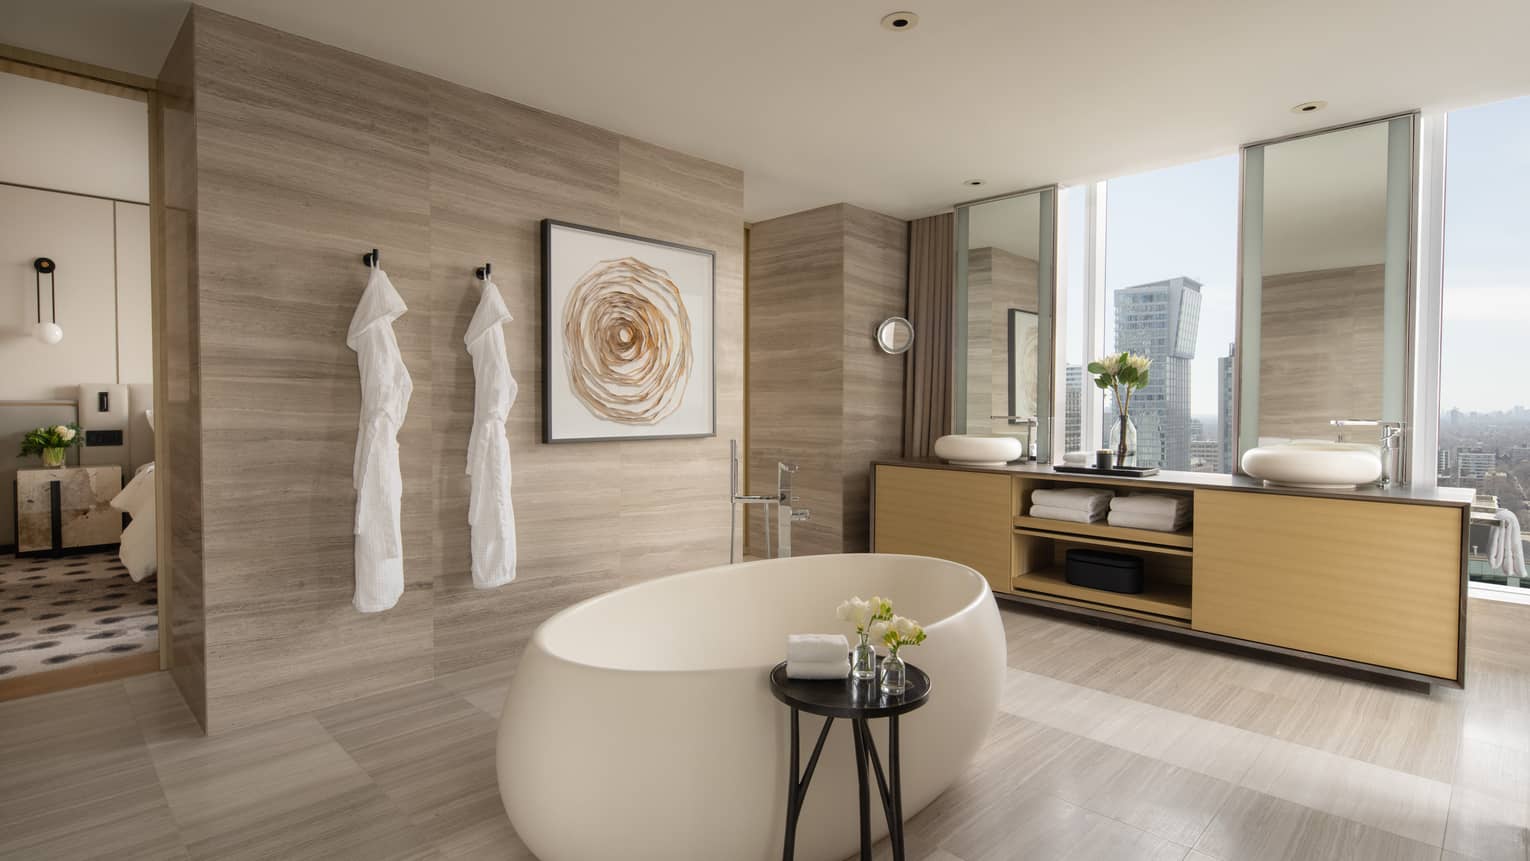 Royal Suite bathroom with standalone tub in the middle of the room, double vanity and windows, at Four Seasons Hotel Toronto